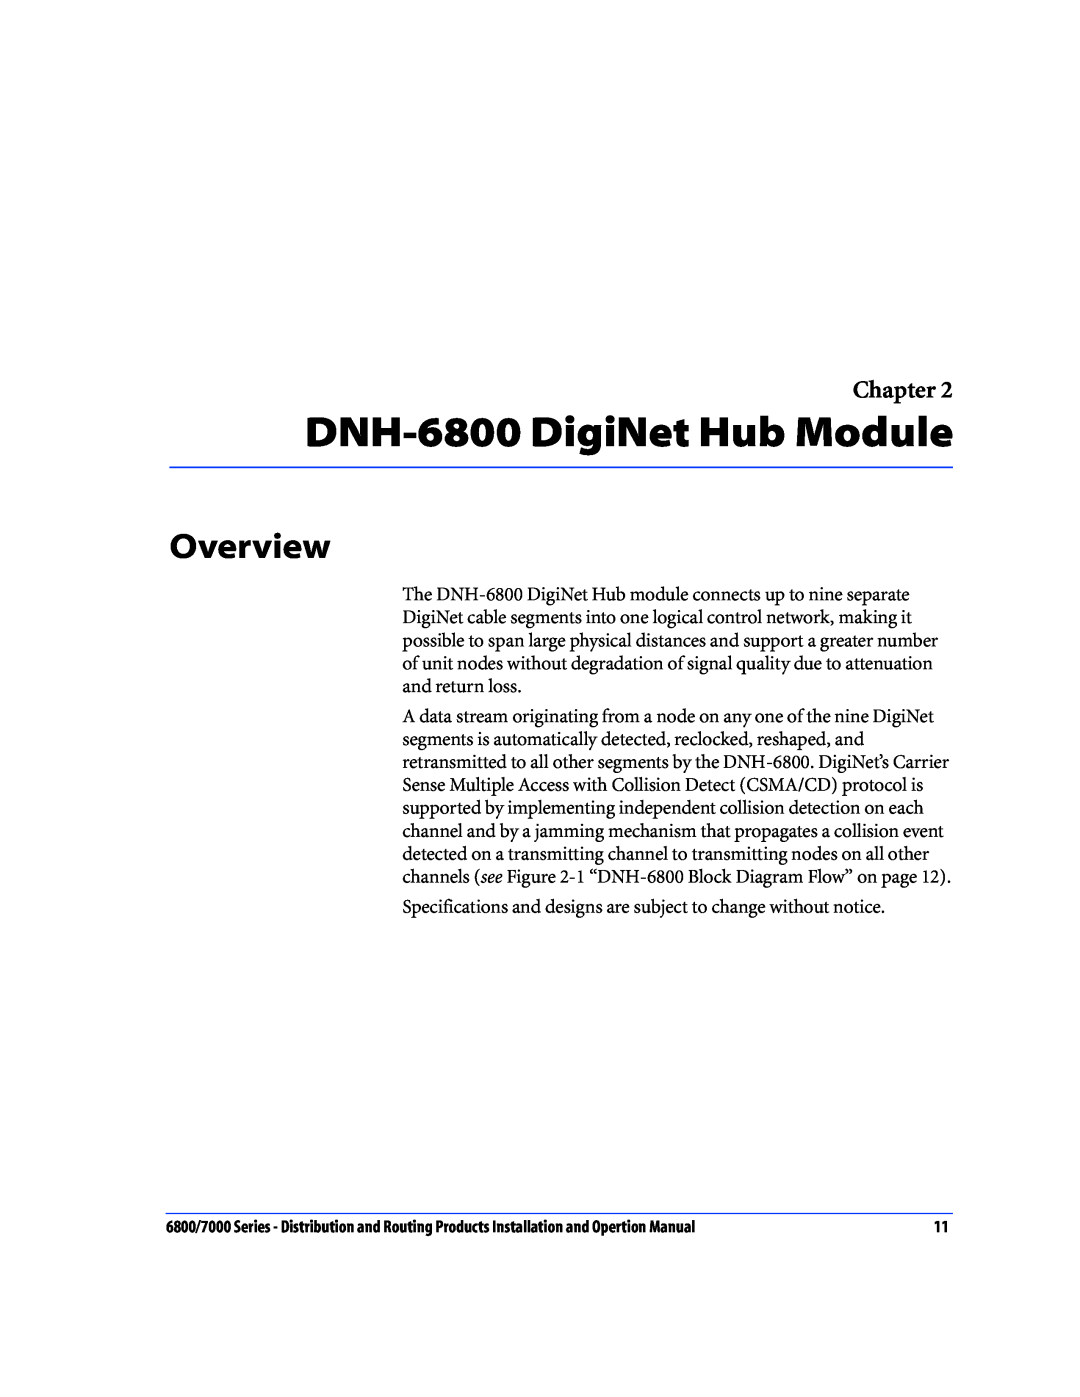 Nokia 6800 Series, 7000 Series operation manual DNH-6800 DigiNet Hub Module, Overview, Chapter 